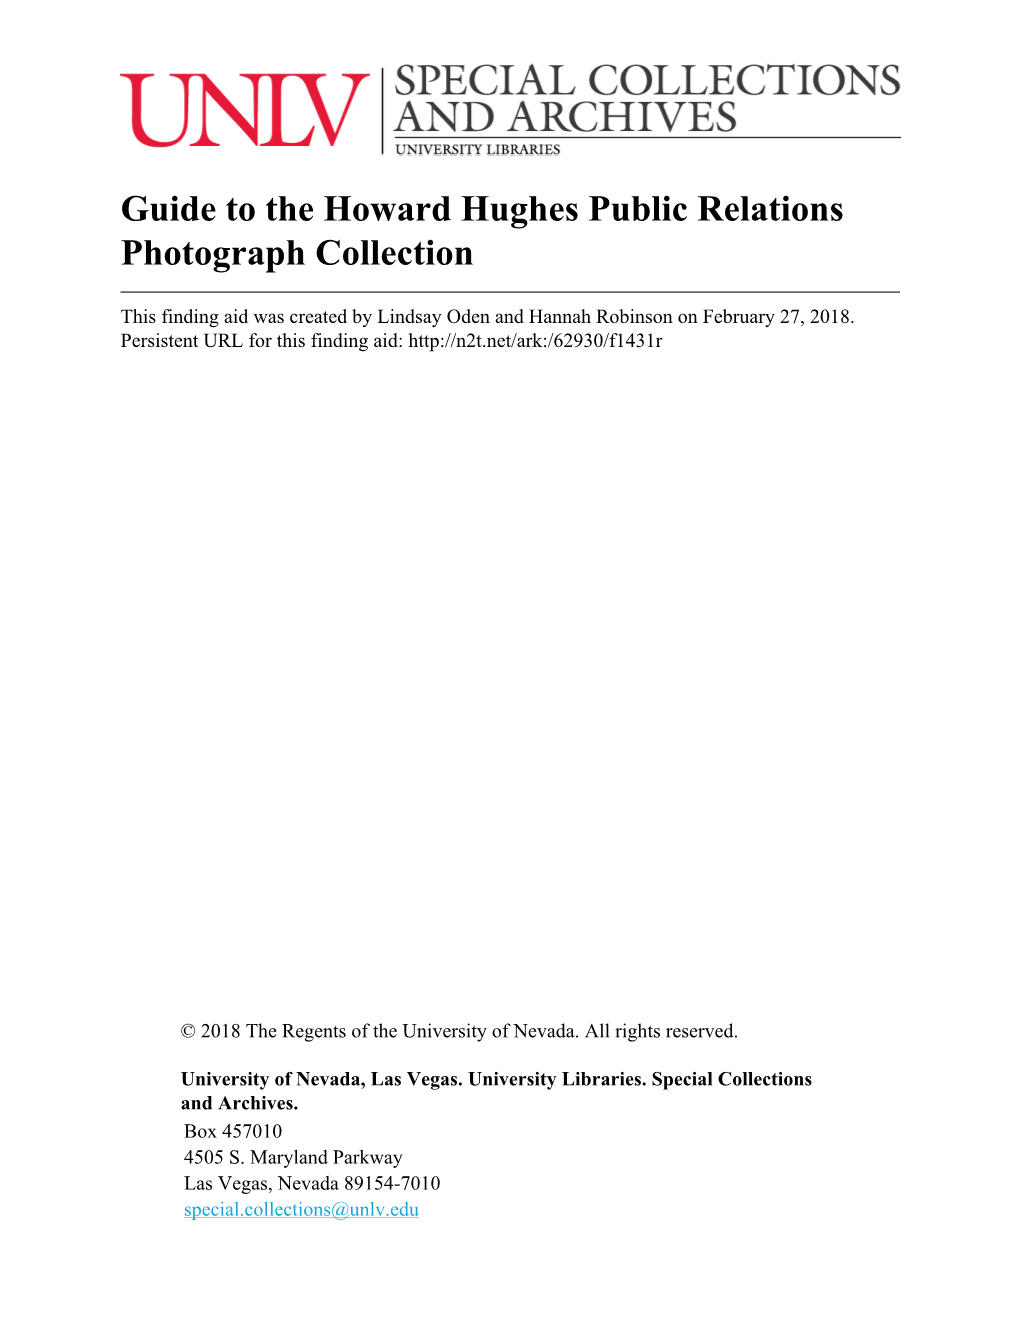 Guide to the Howard Hughes Public Relations Photograph Collection